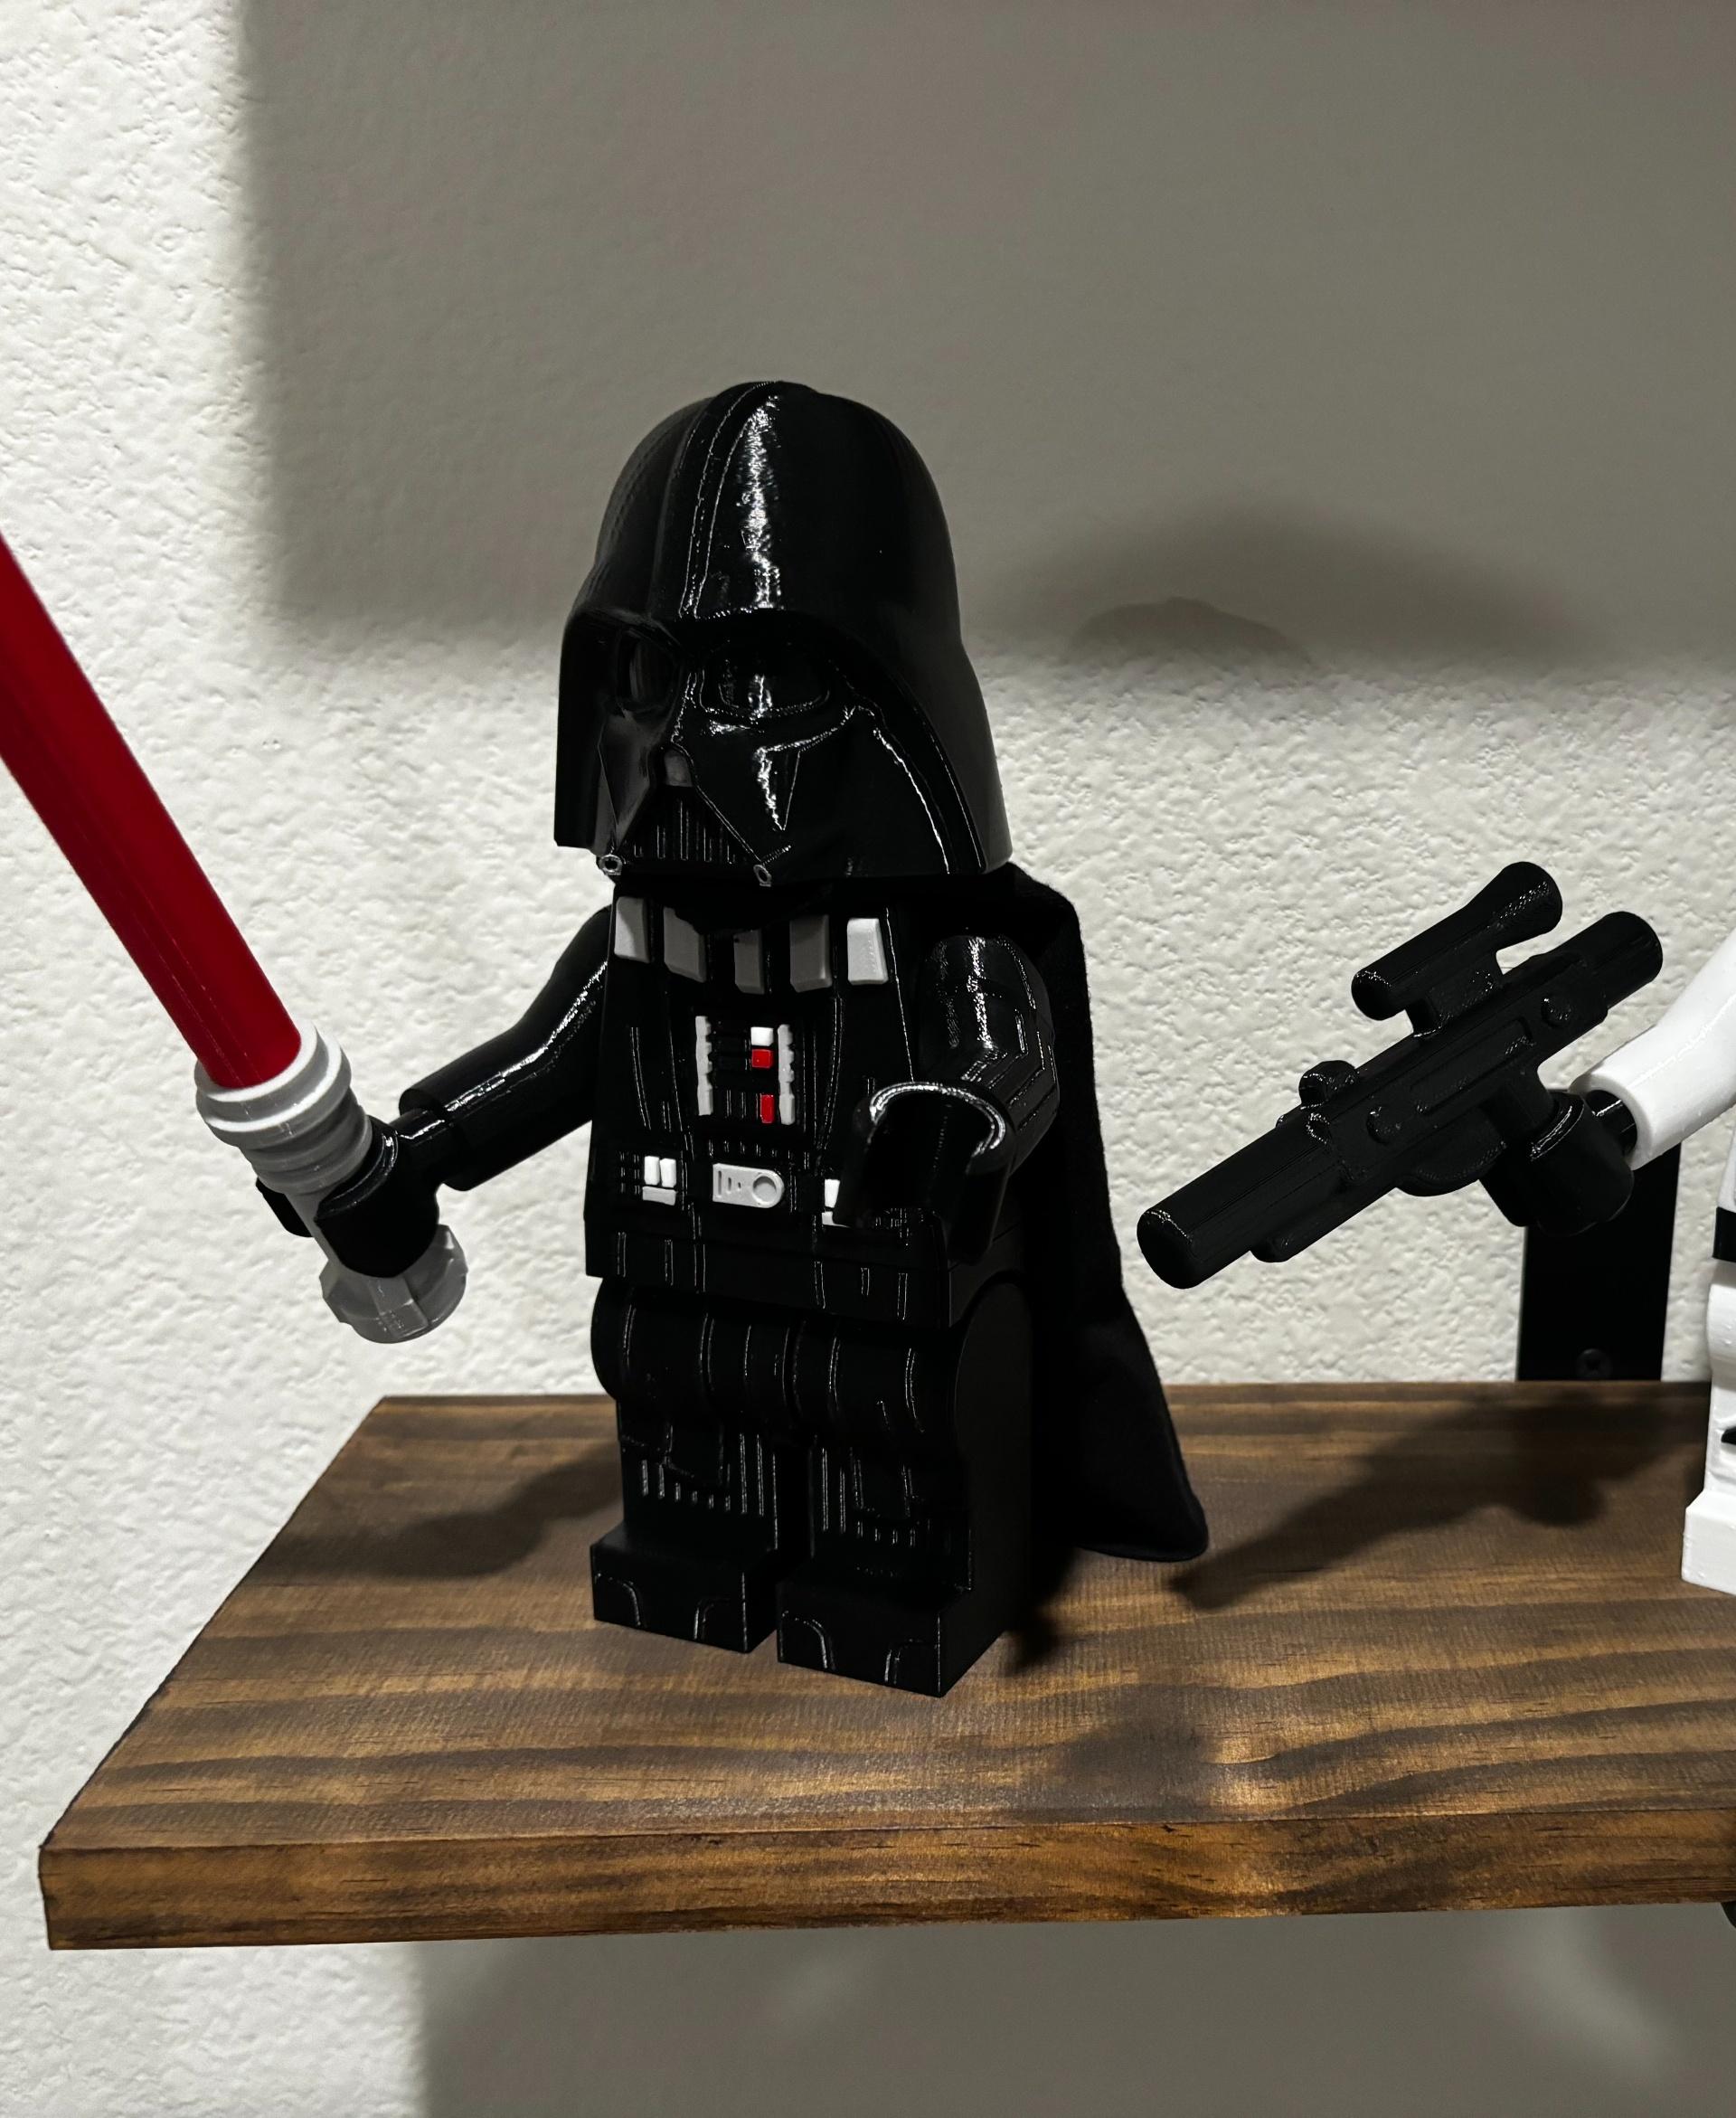 Darth Vader (6:1 LEGO-inspired brick figure, NO MMU/AMS, NO supports, NO glue) - These models are so fun to print! - 3d model